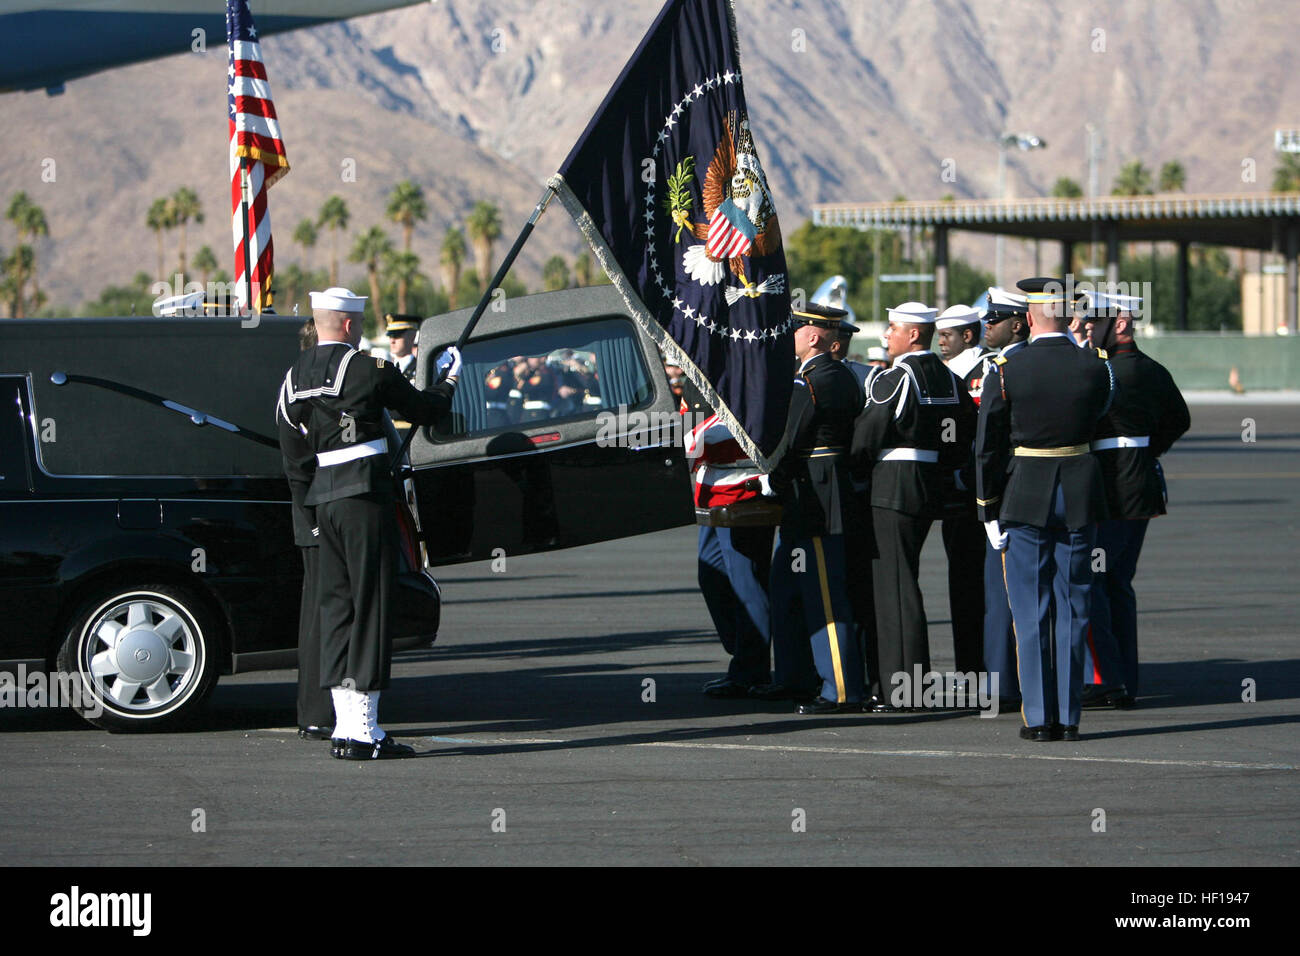 061230-M-3913K-010 Palm Springs, Calif. (Dec. 30, 2006) Ð Military personnel assigned to the Armed Forces Honor Guard transport the flag-draped casket of former President Gerald R. Ford to awaiting Presidential aircraft during his departure ceremony at the Palm Springs International Airport in Palm Springs, Calif., Dec. 30, 2006. DoD personnel are helping to honor Ford, the 38th president of the United States, who passed away on Dec. 26th. Ford's remains were flown to Washington, D.C., for a state funeral in the Capitol Rotunda and a funeral service at the Washington National Cathedral, follow Stock Photo